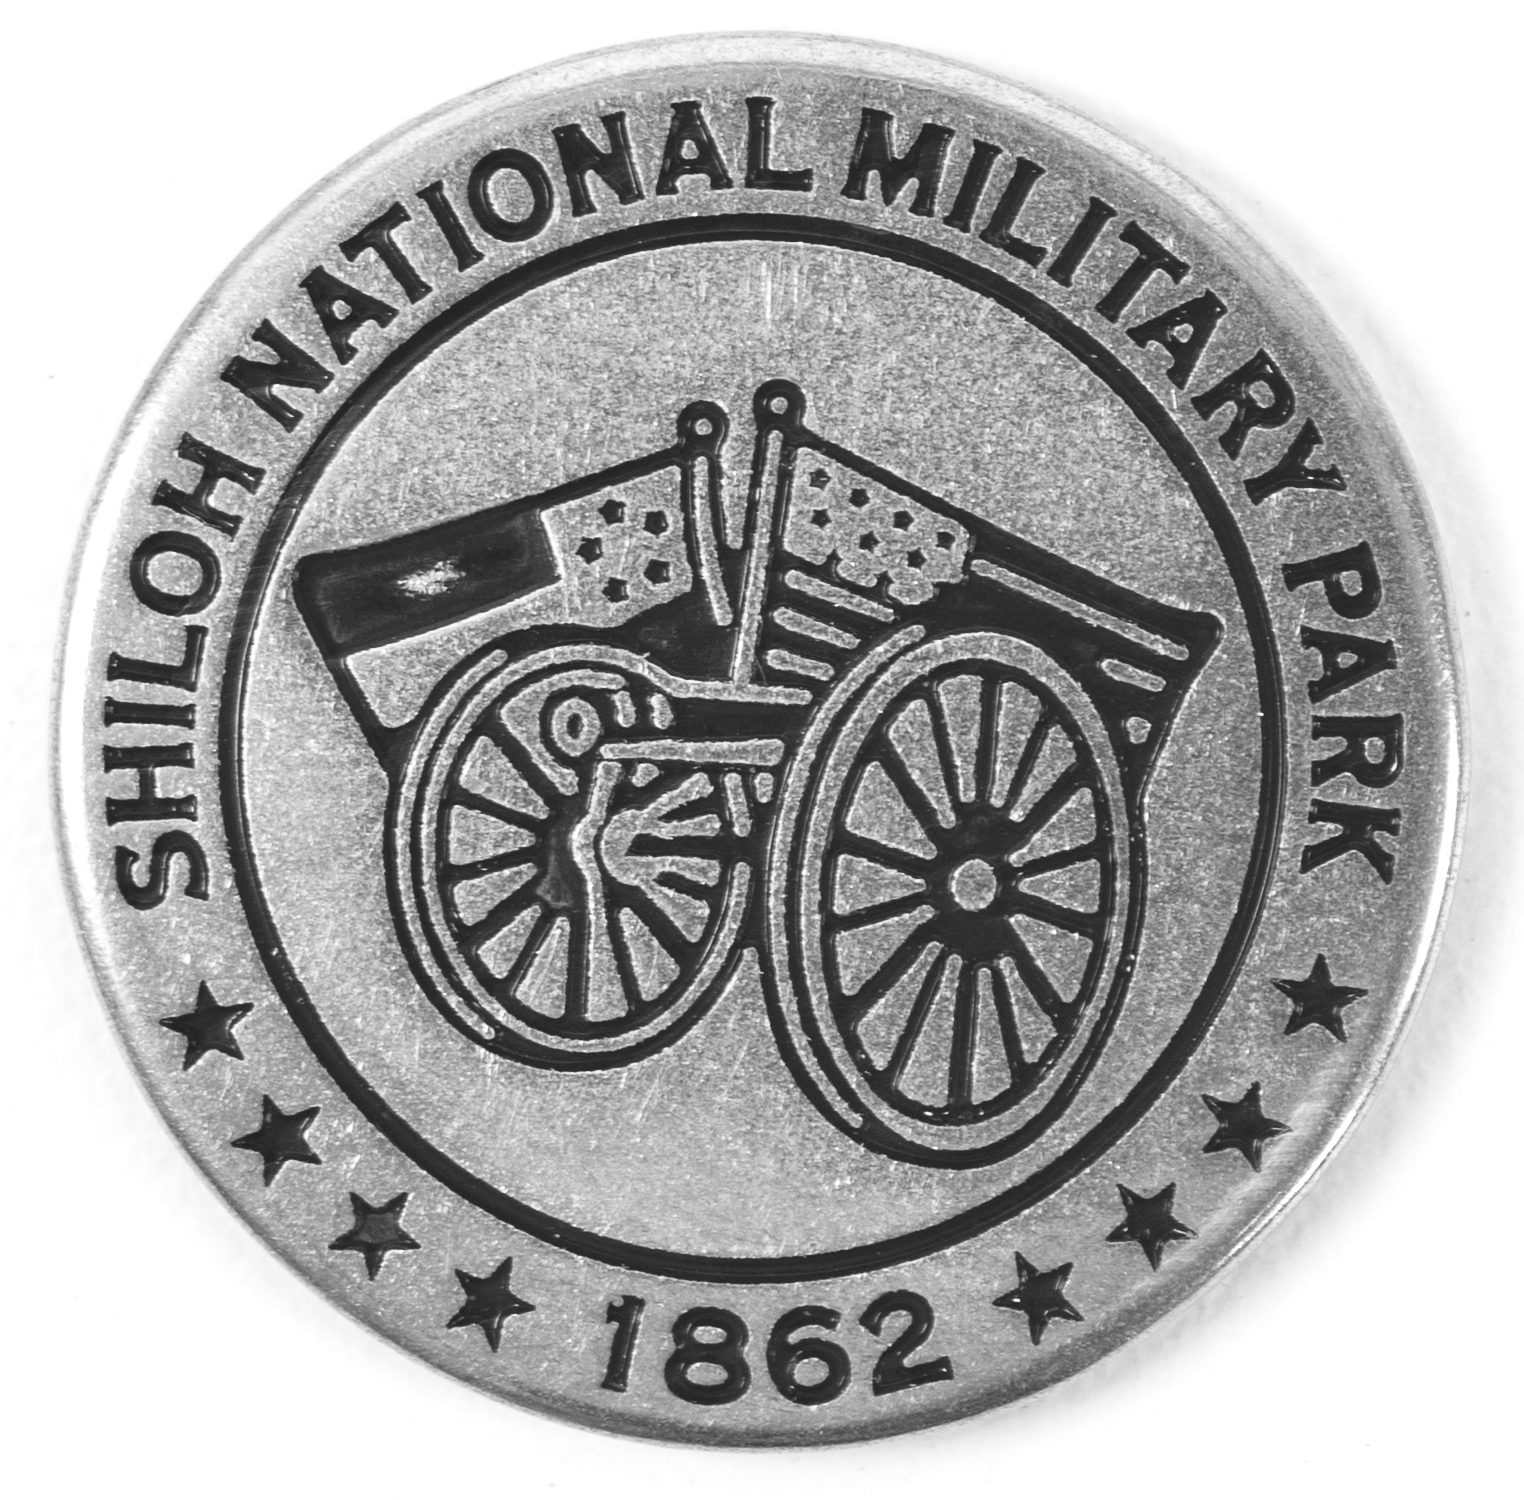 Shiloh National Military Park  token front